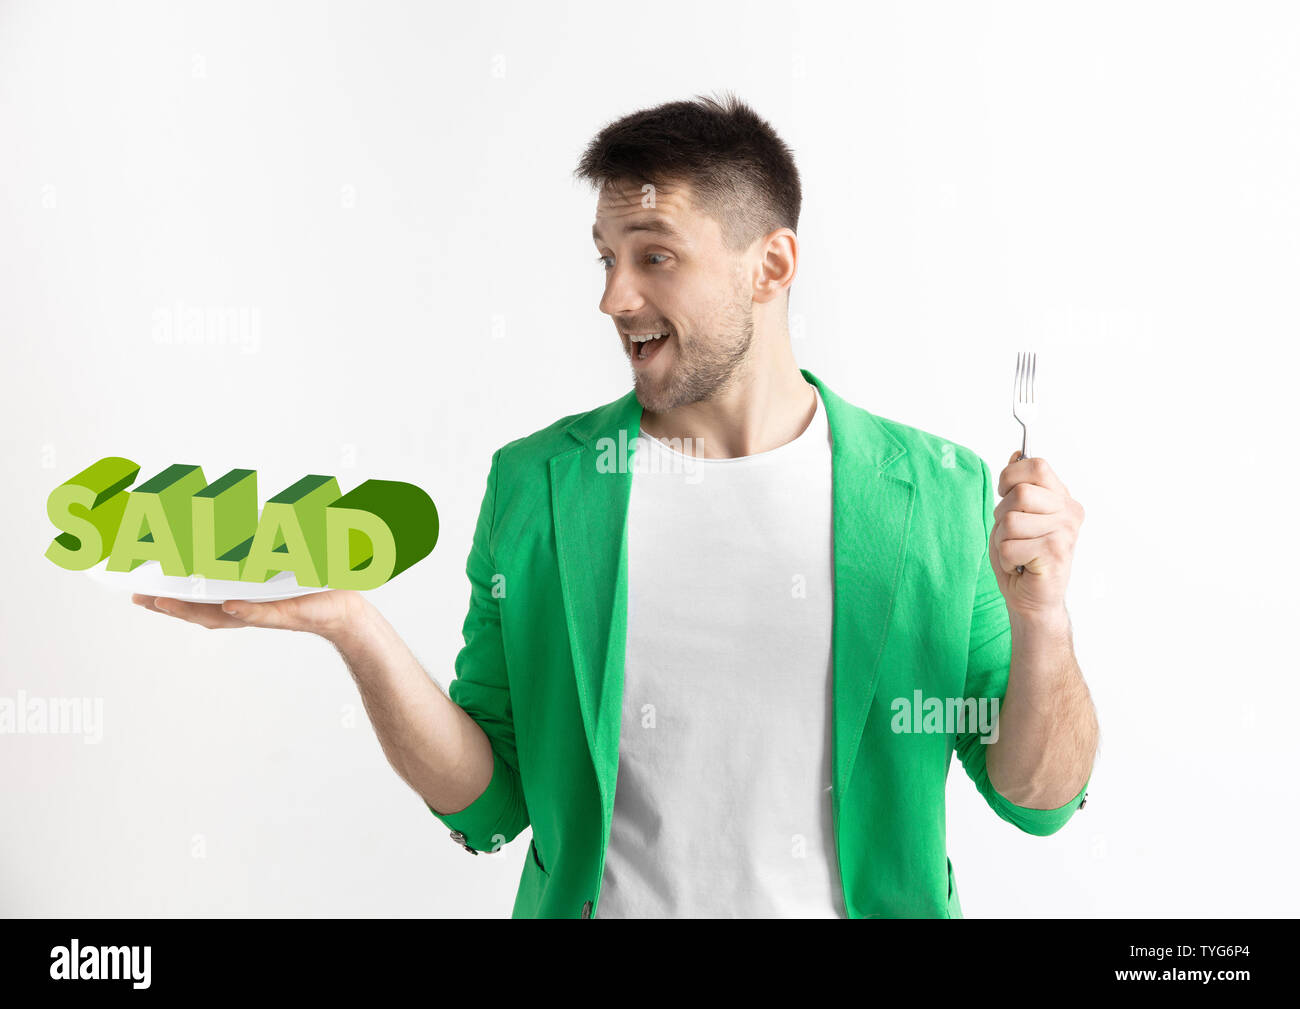 Man in green jacket with the folk isolated on white. Male model holding a plate with letters of word Salad. Choosing healthy eating, diet, organic nutrition and nature friendy lifestyle. Stock Photo